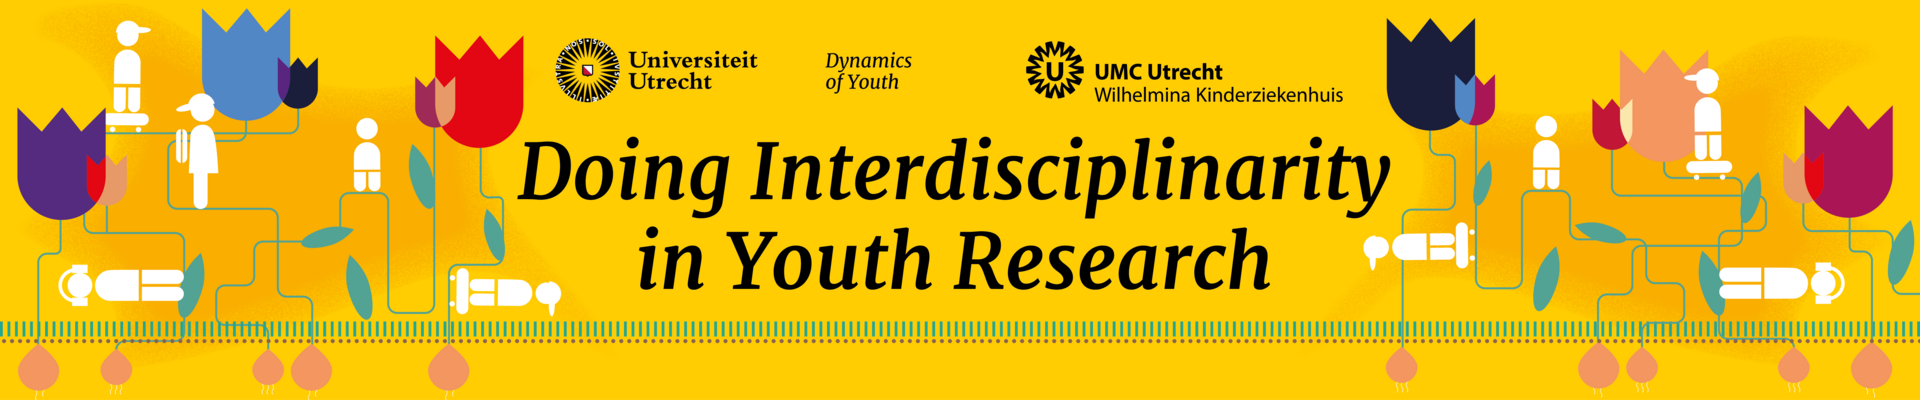 Doing Interdisciplinarity in Youth Research